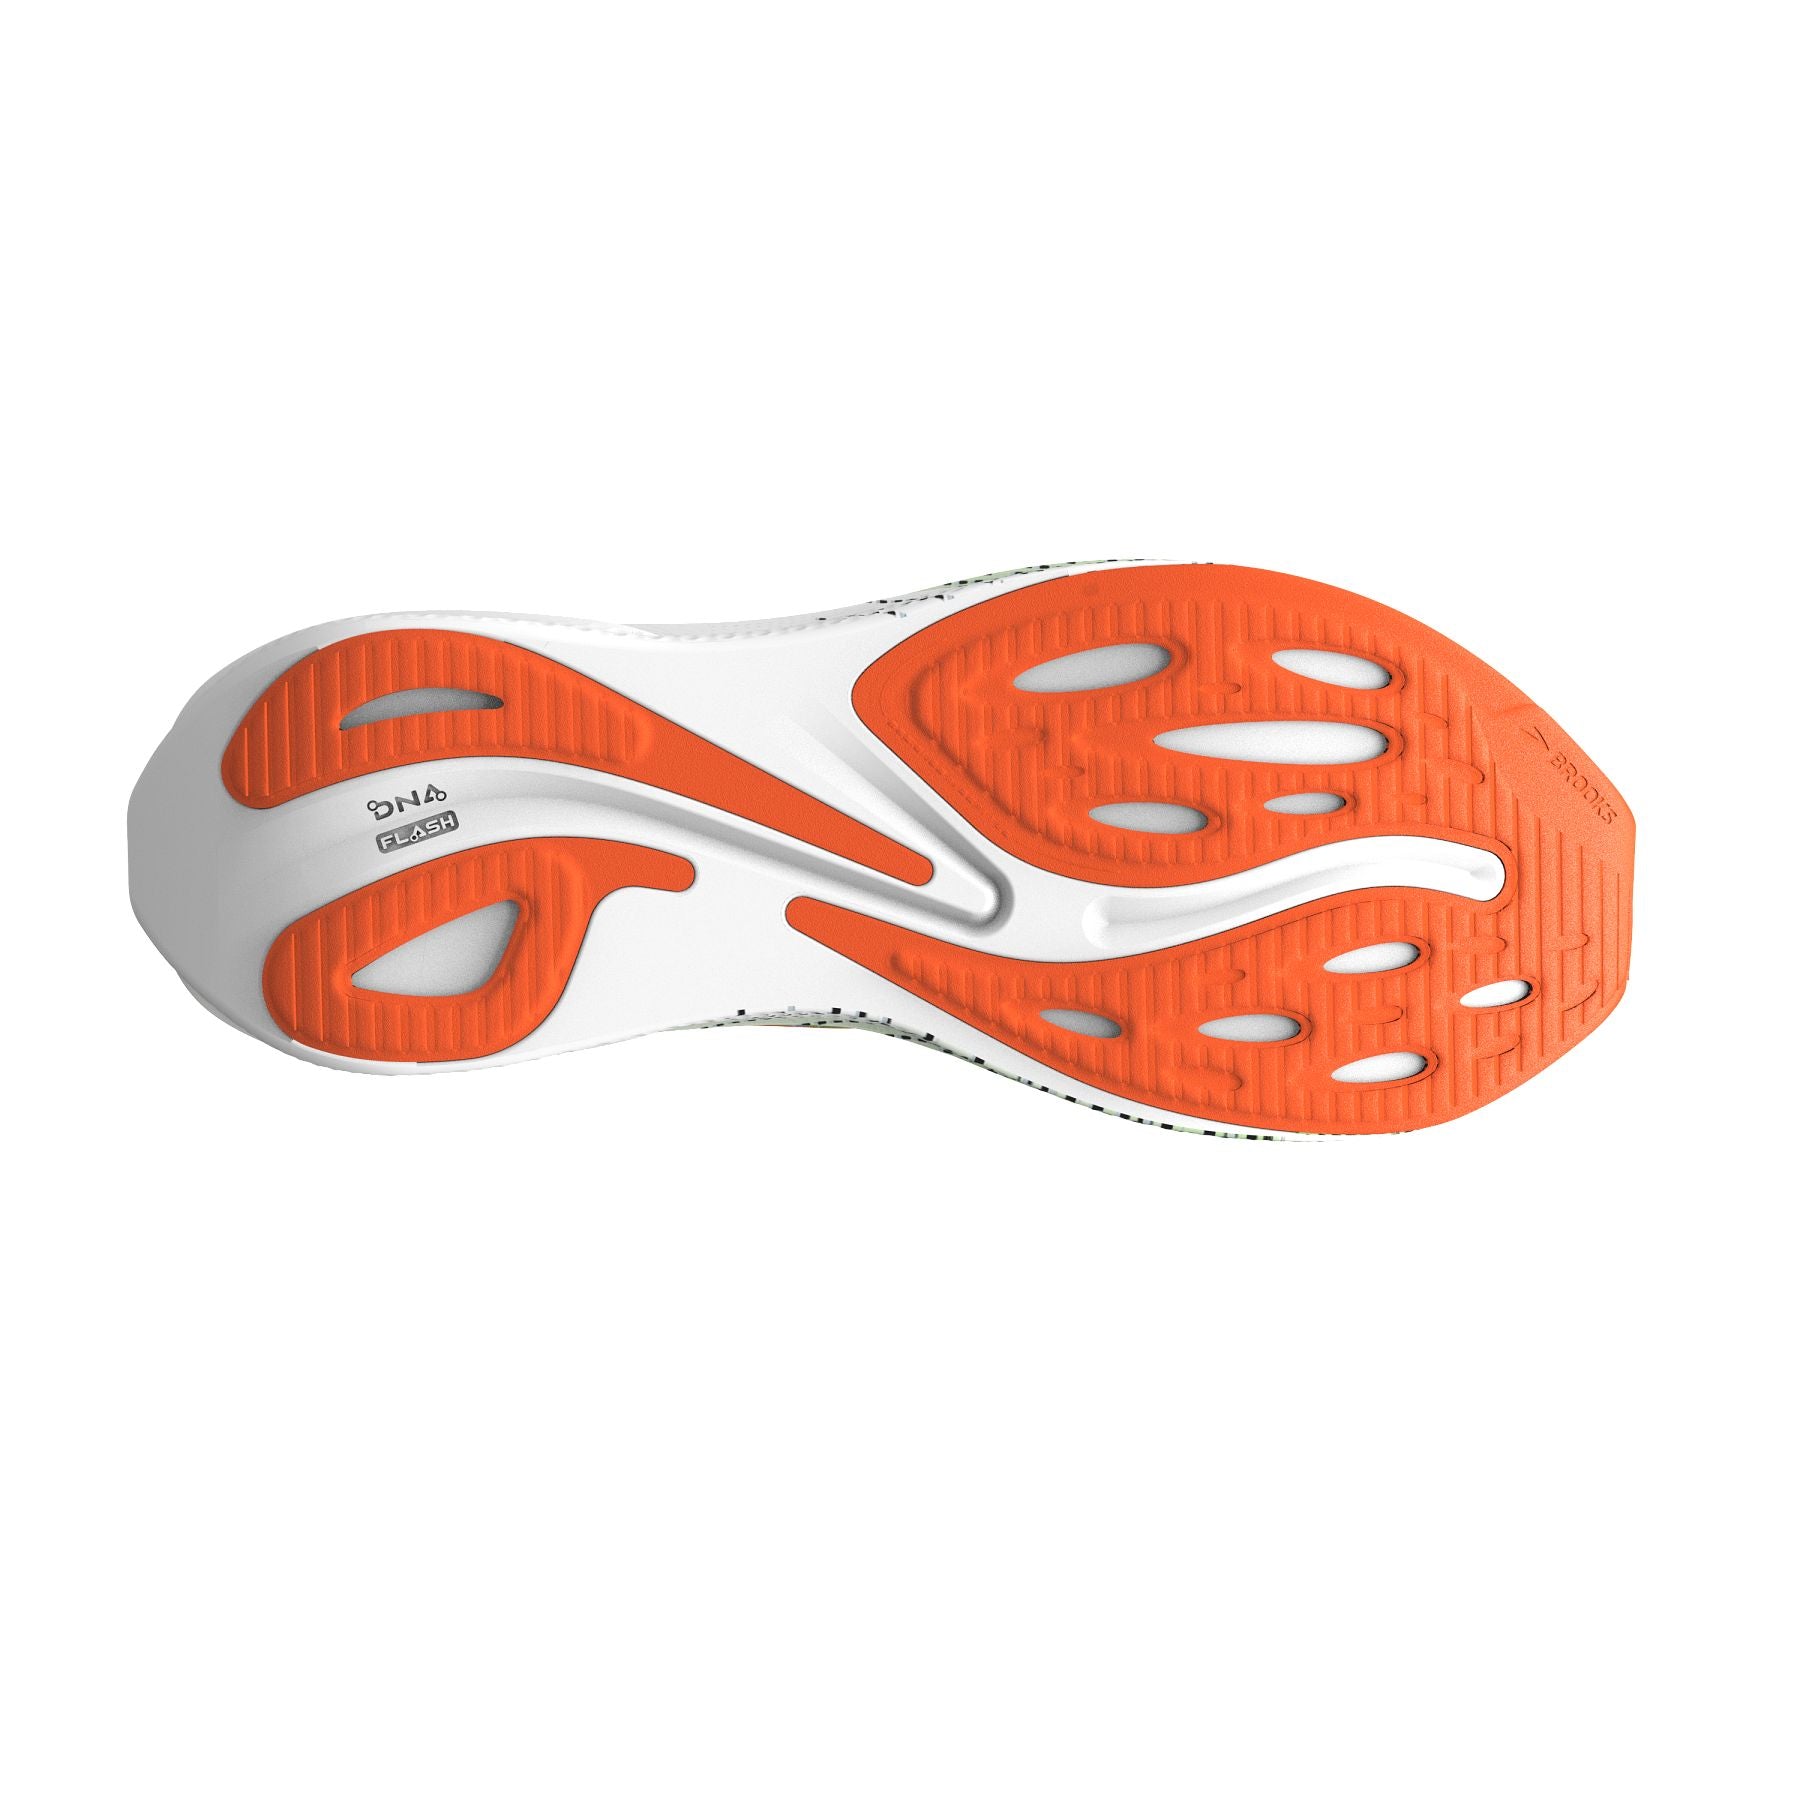 Bottom (outer sole) view of the Men's Hyperion Max in Green Gecko/Red Orange/White